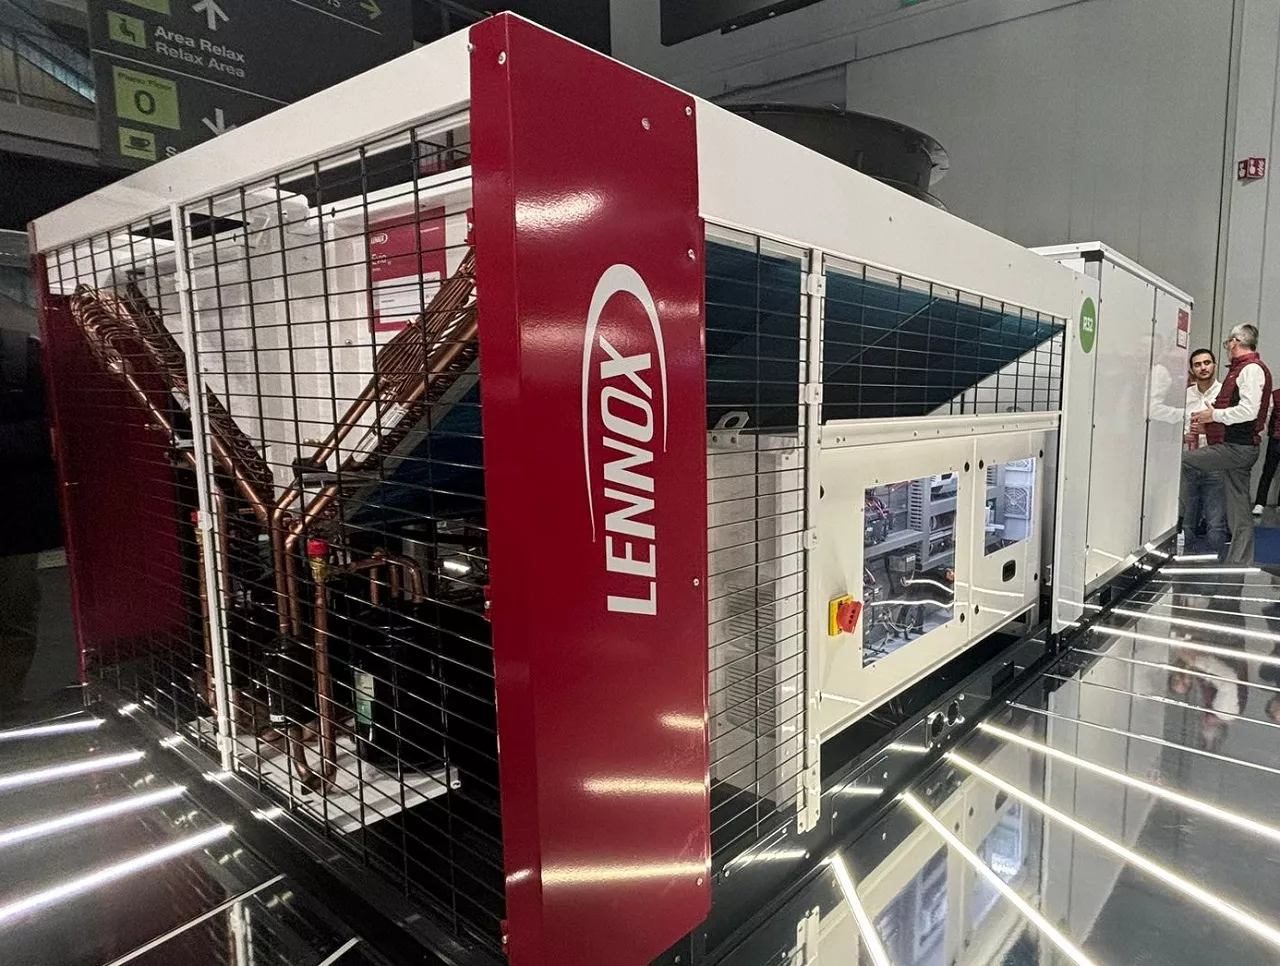 Lennox launched the latest generation of air-cooled rooftop units Evio